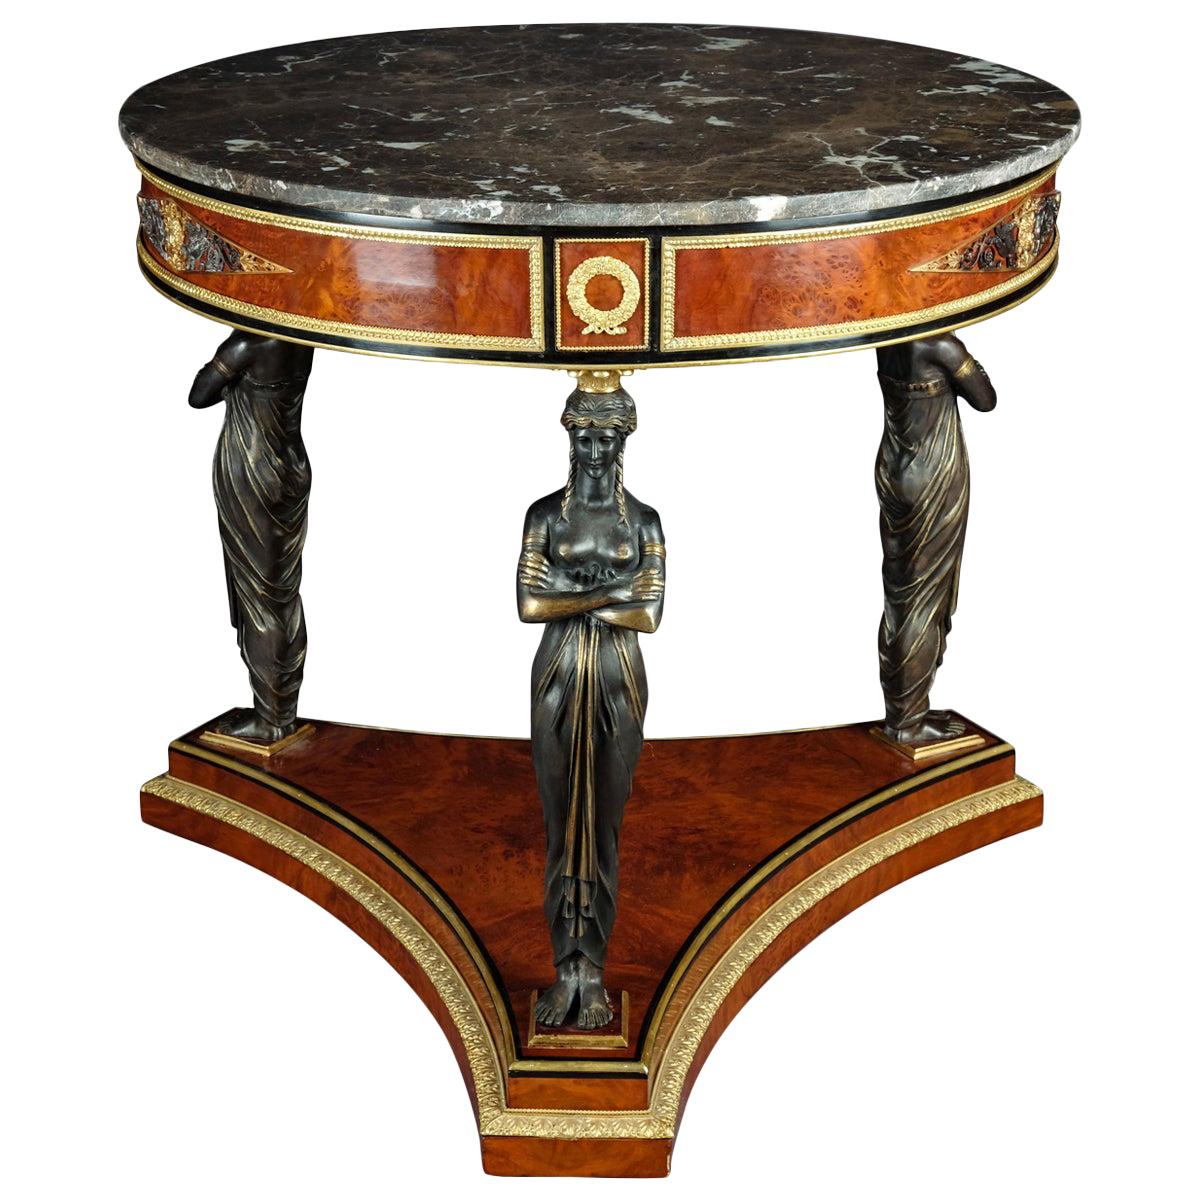 Royal and Unique Center Table/Salon Table Empire Style, Brass